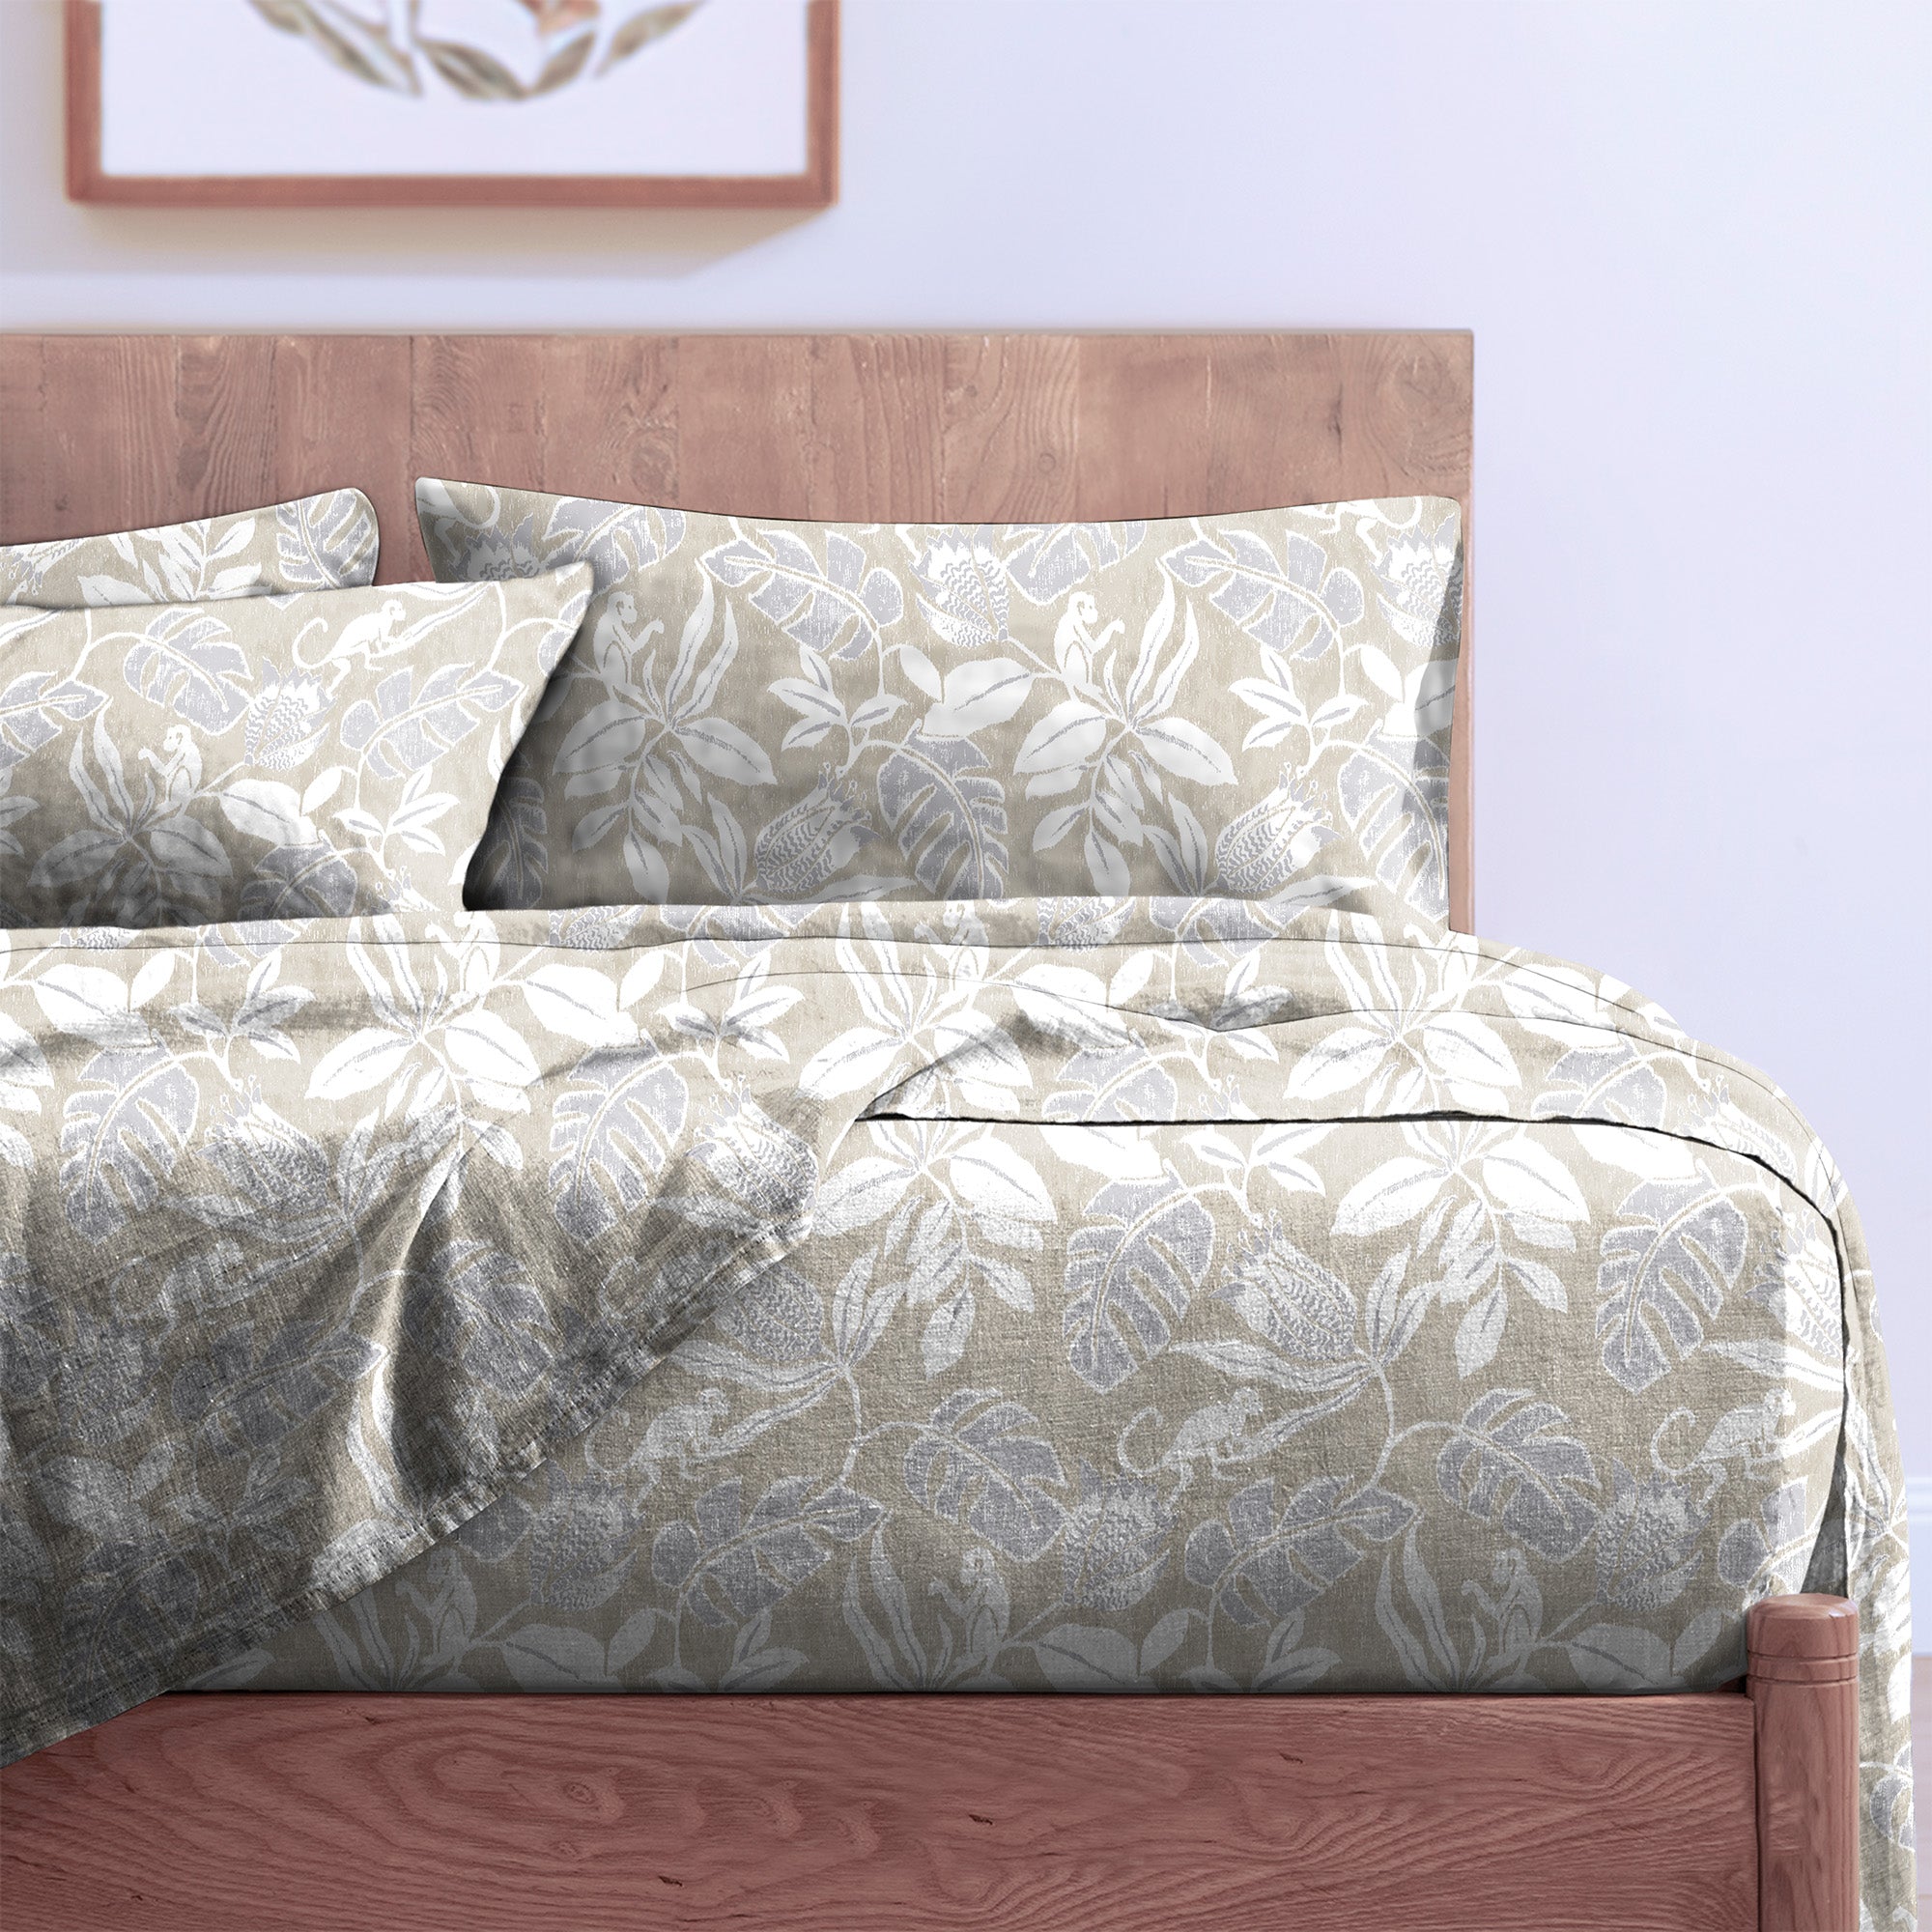 SAVANNA PUMICE BEDCOVER FOR DOUBLE BED WITH 2 PILLOWCOVERS KING SIZE (104" X 90")